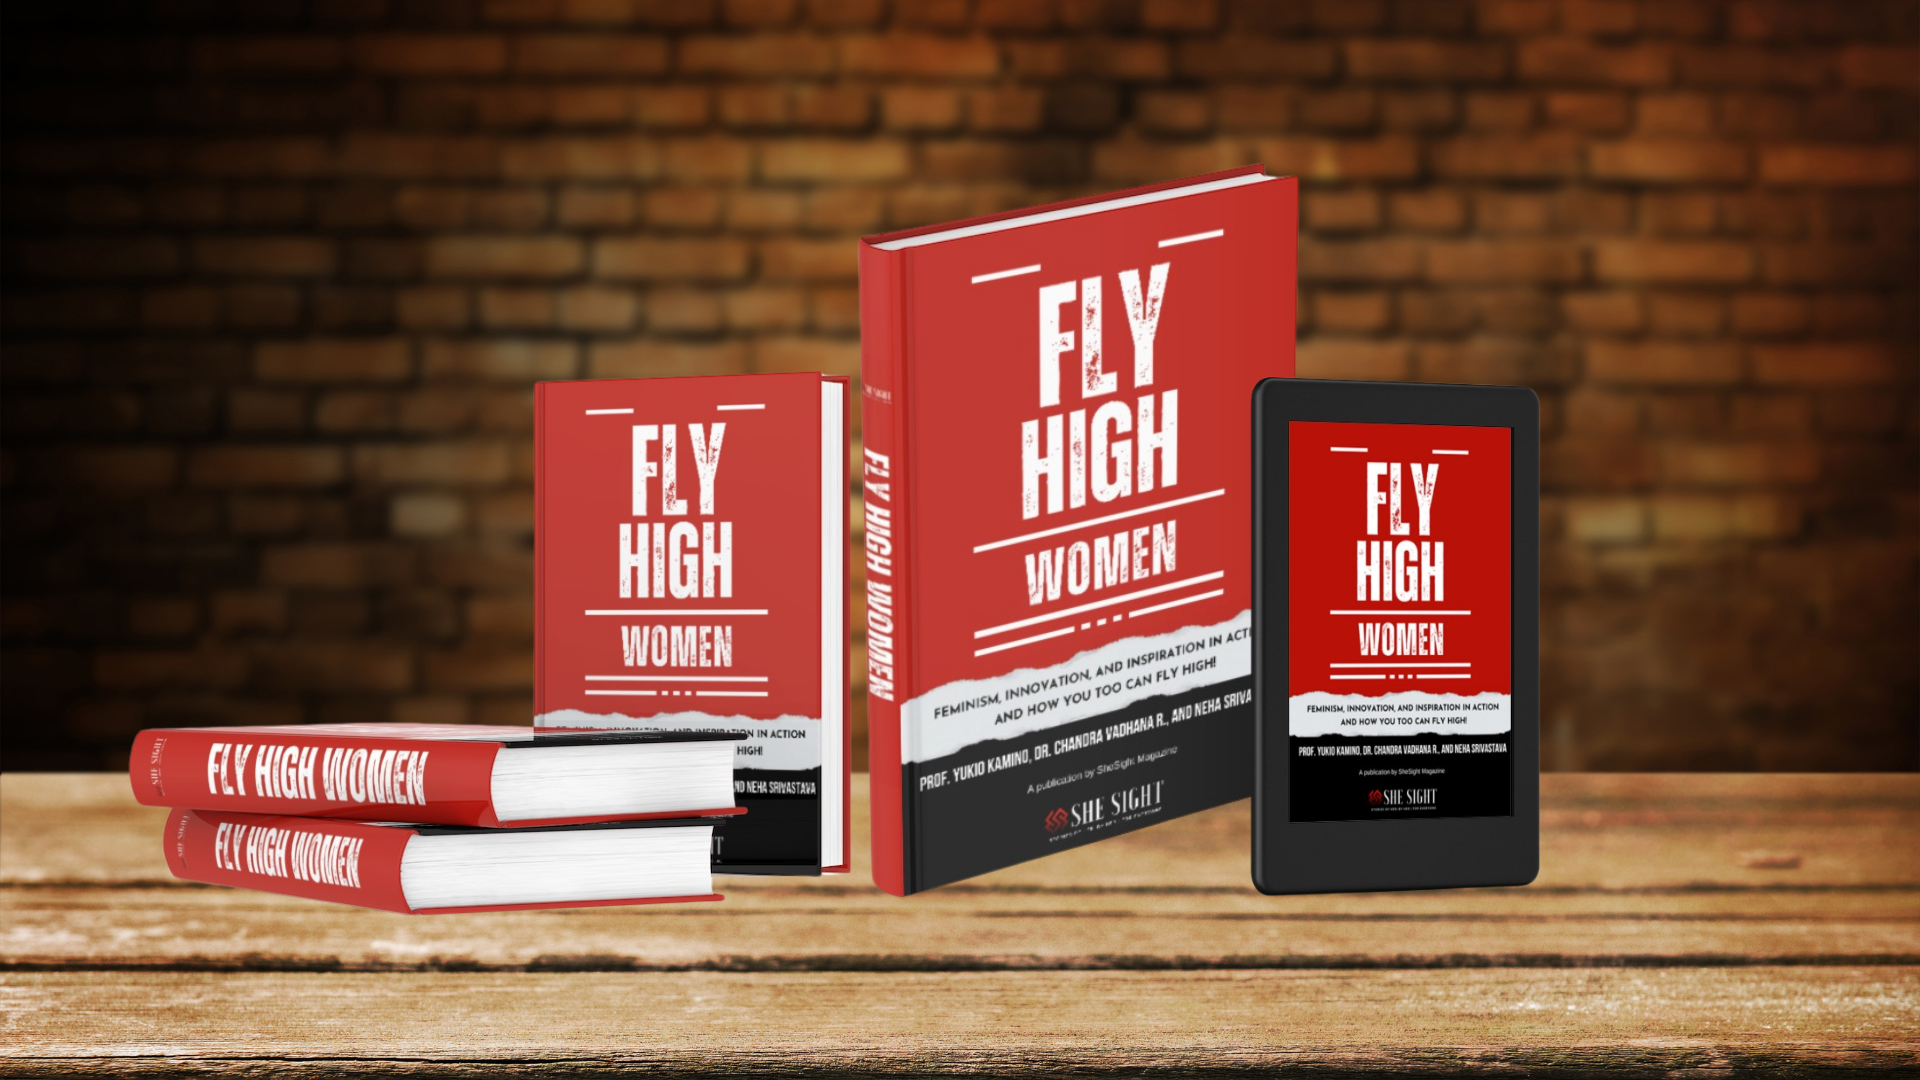 Fly High Women: Feminism, Innovation, and Inspiration in Action And how you too can fly high! Buy One, Gift One